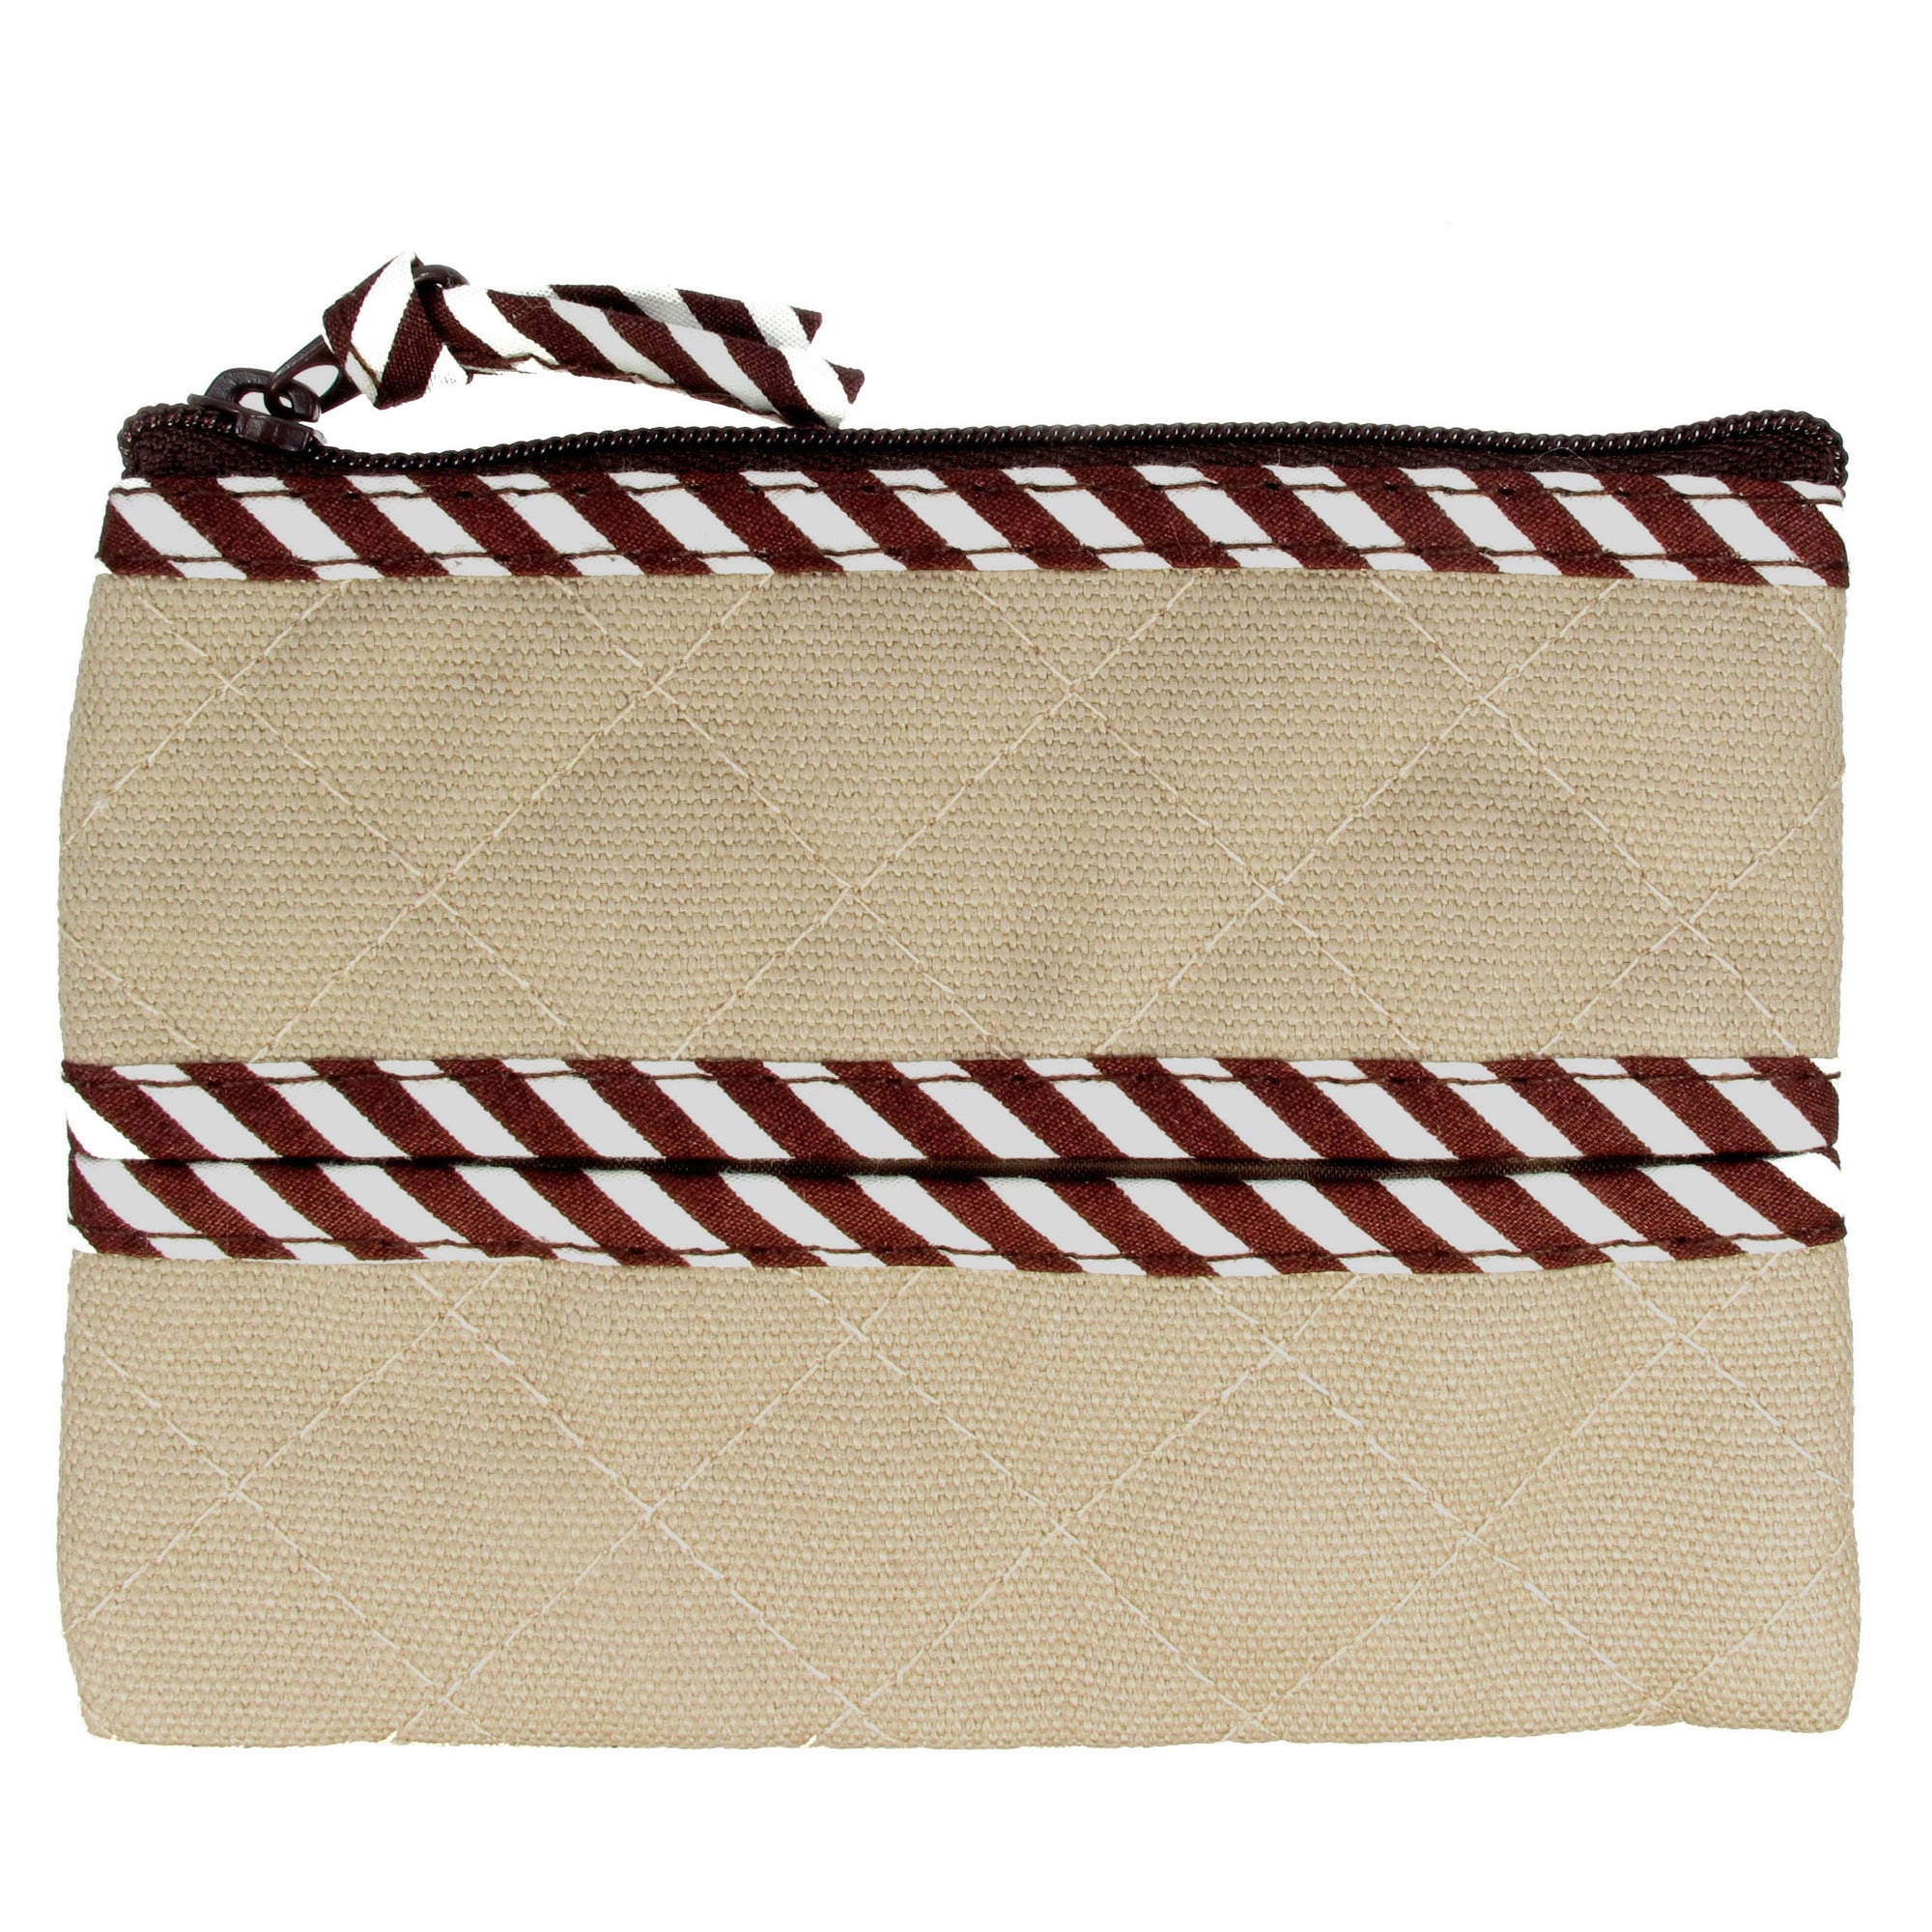 Coin Purse & Pouch, Quilted Canvas, Khaki